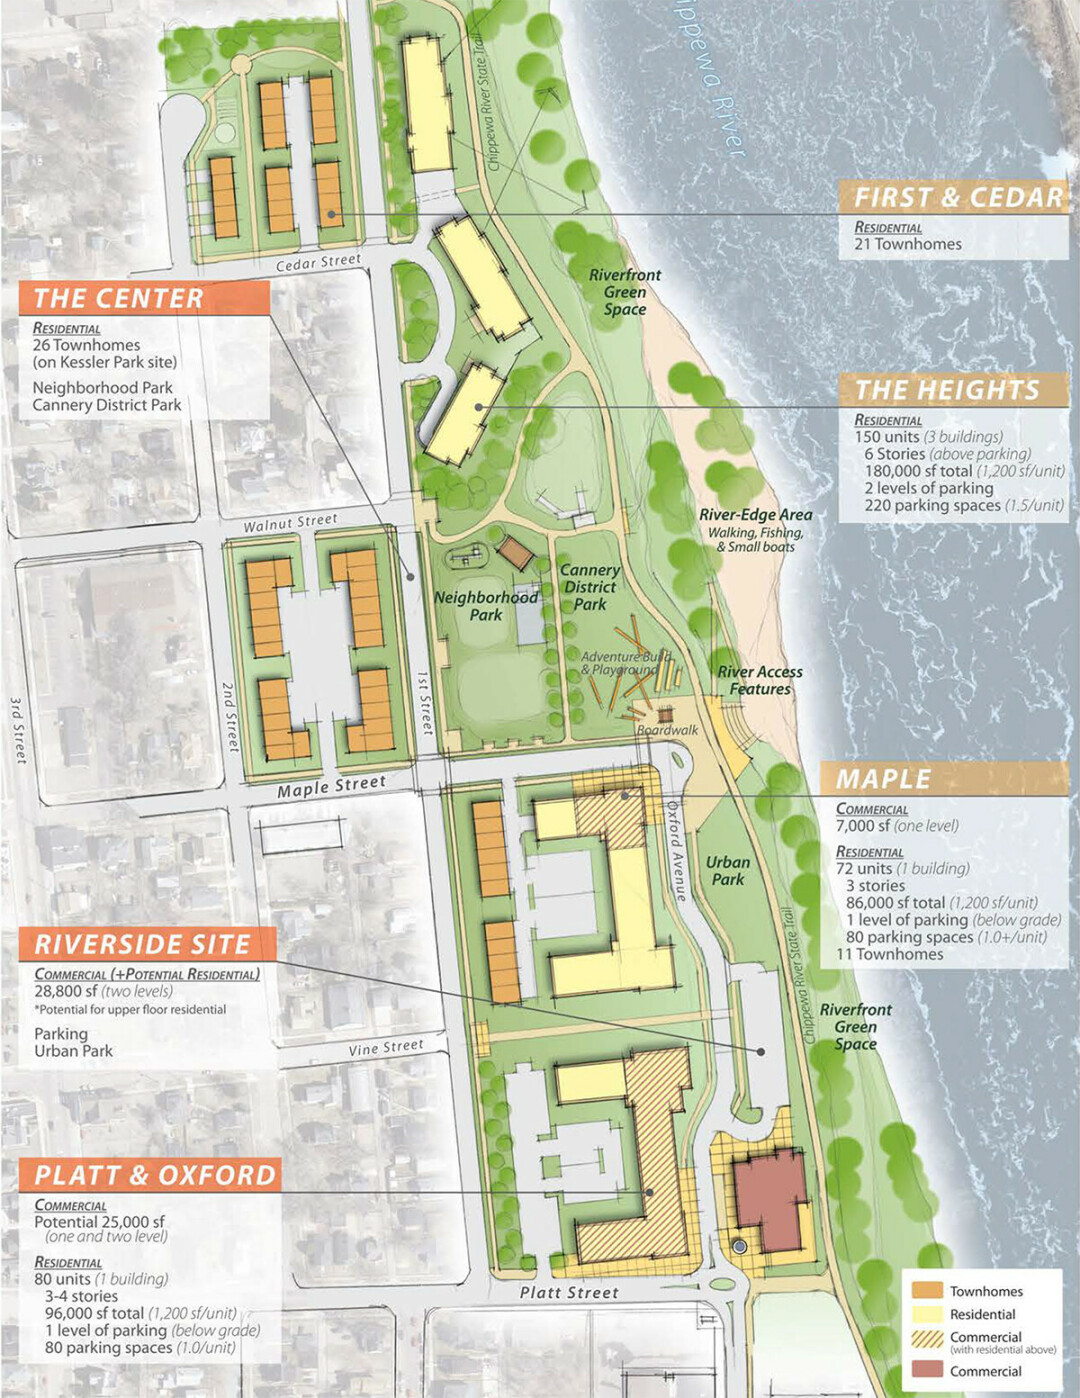 This redevelopment map of the Cannery District was adopted by the 